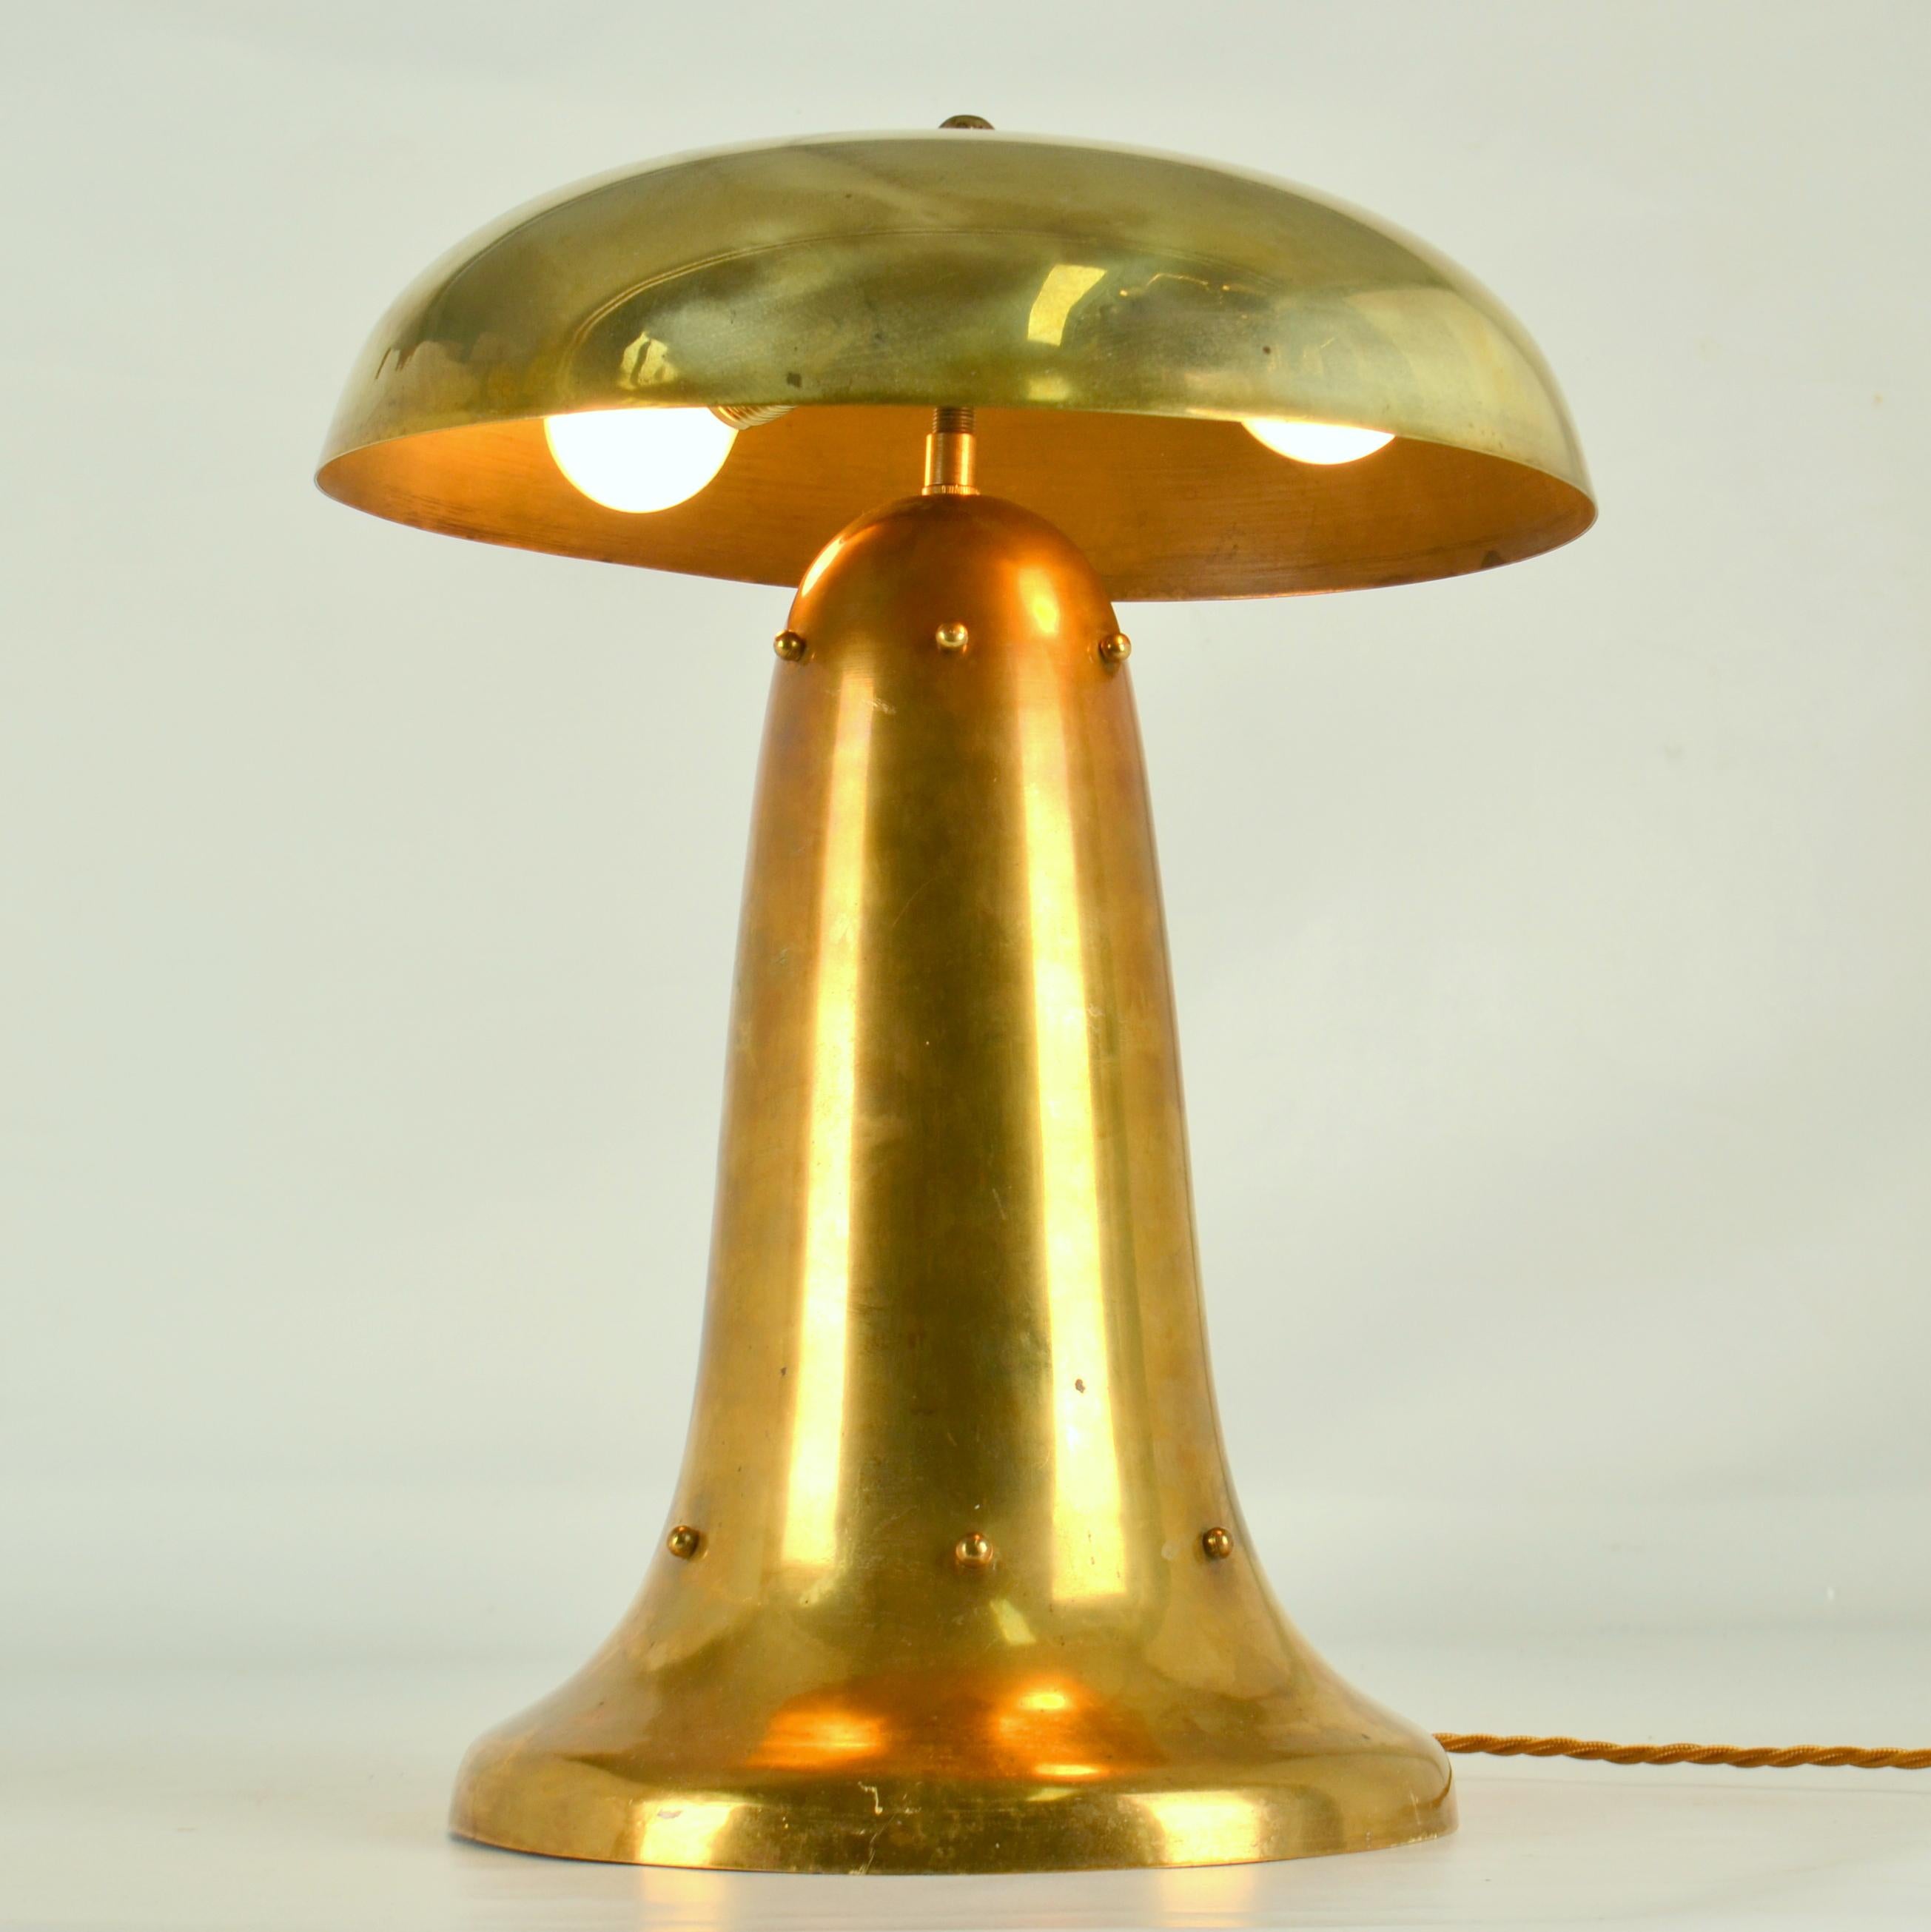 Modernist Brass Mushroom Shape Table Lamp Dutch 1920's In Good Condition For Sale In London, GB